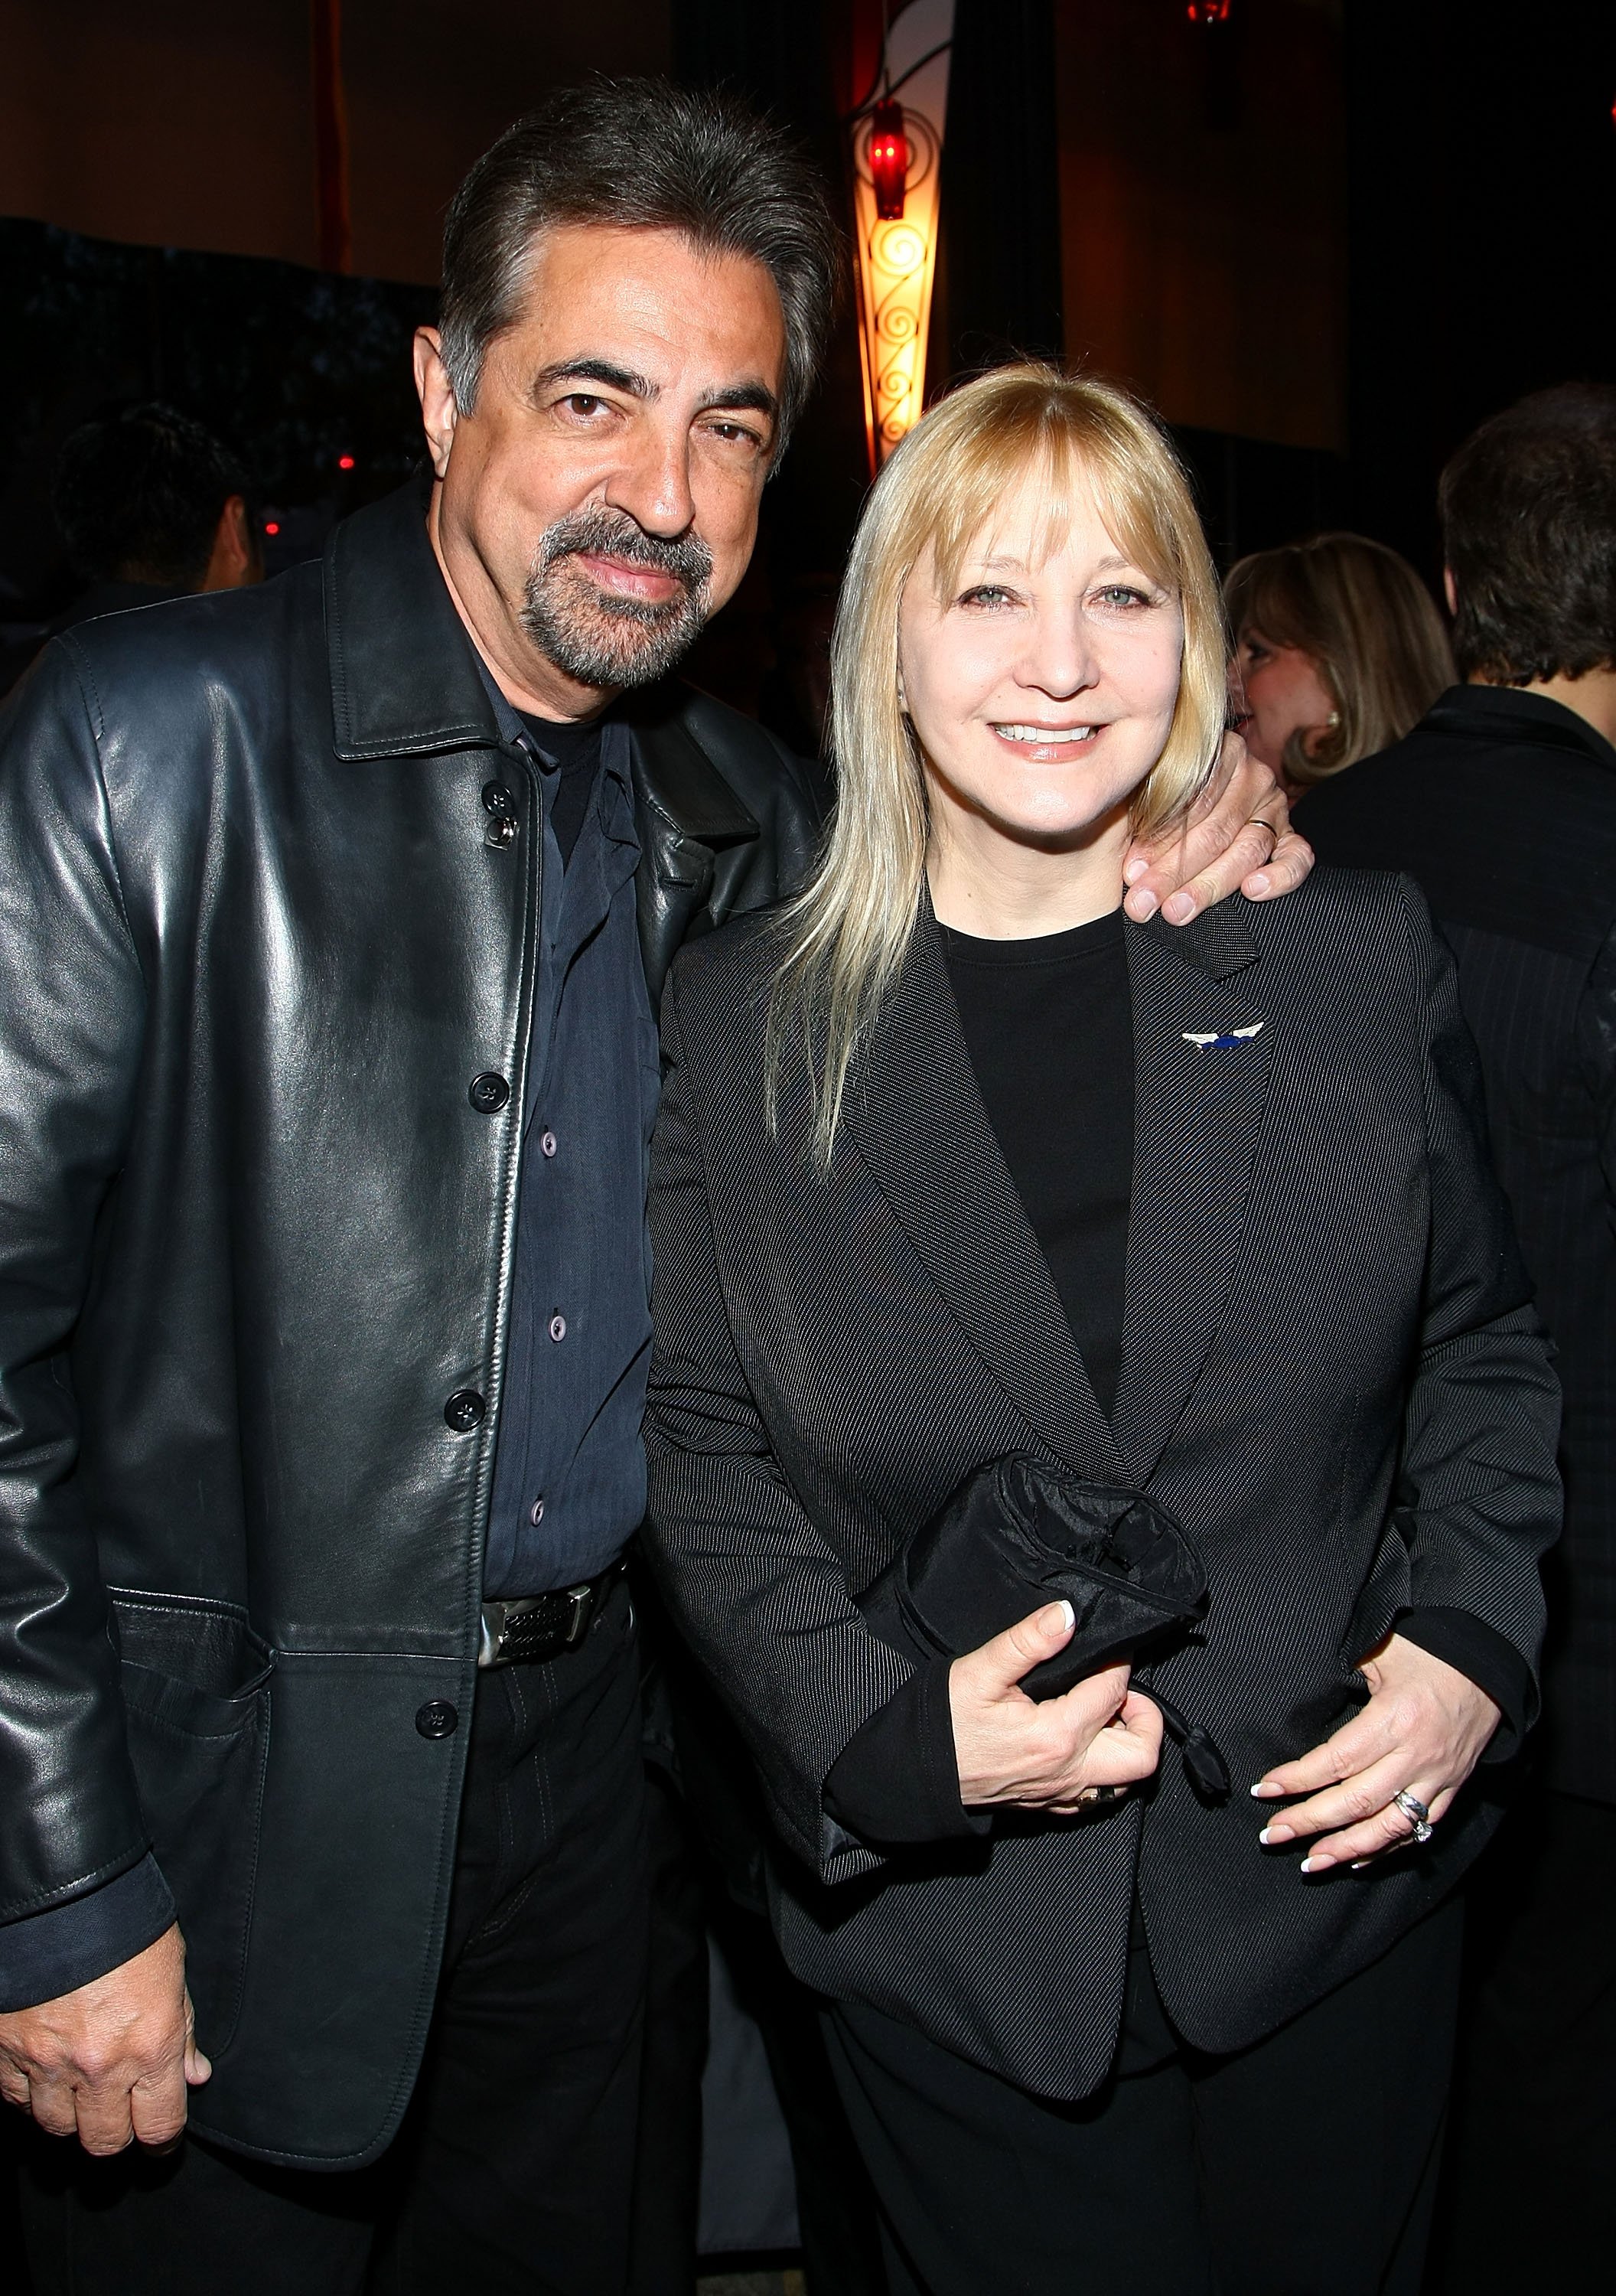 Joe Mantegna and wife Arlene Vrhel attend The Tonys Go Hollywood event hosted by The American Theatre Wing and tThe Broadway League at La Boheme restaurant on April 3, 2008, in West Hollywood, California. | Source: Getty Images.